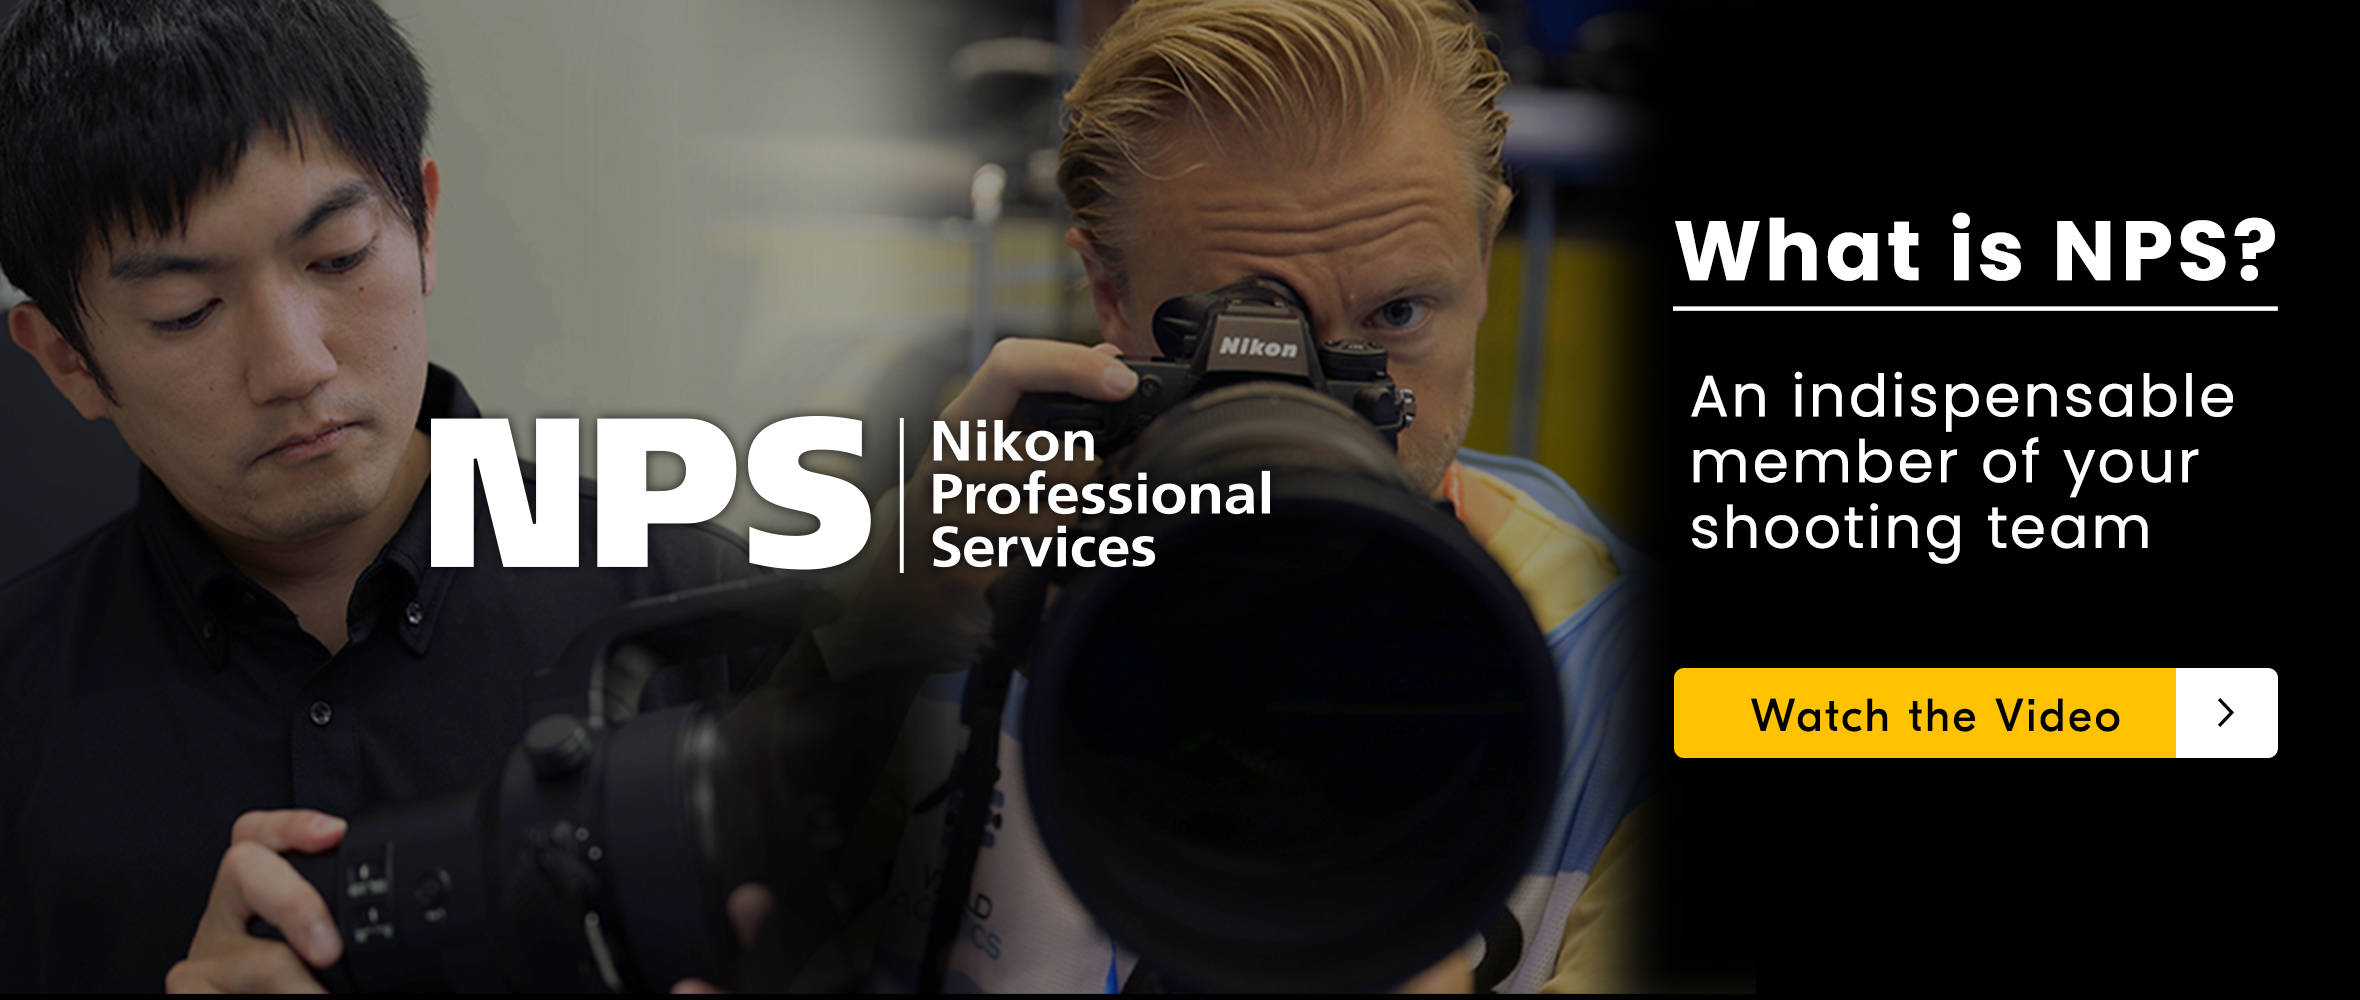 What is NPS? An indispensable member of your shooting team Watch the Video